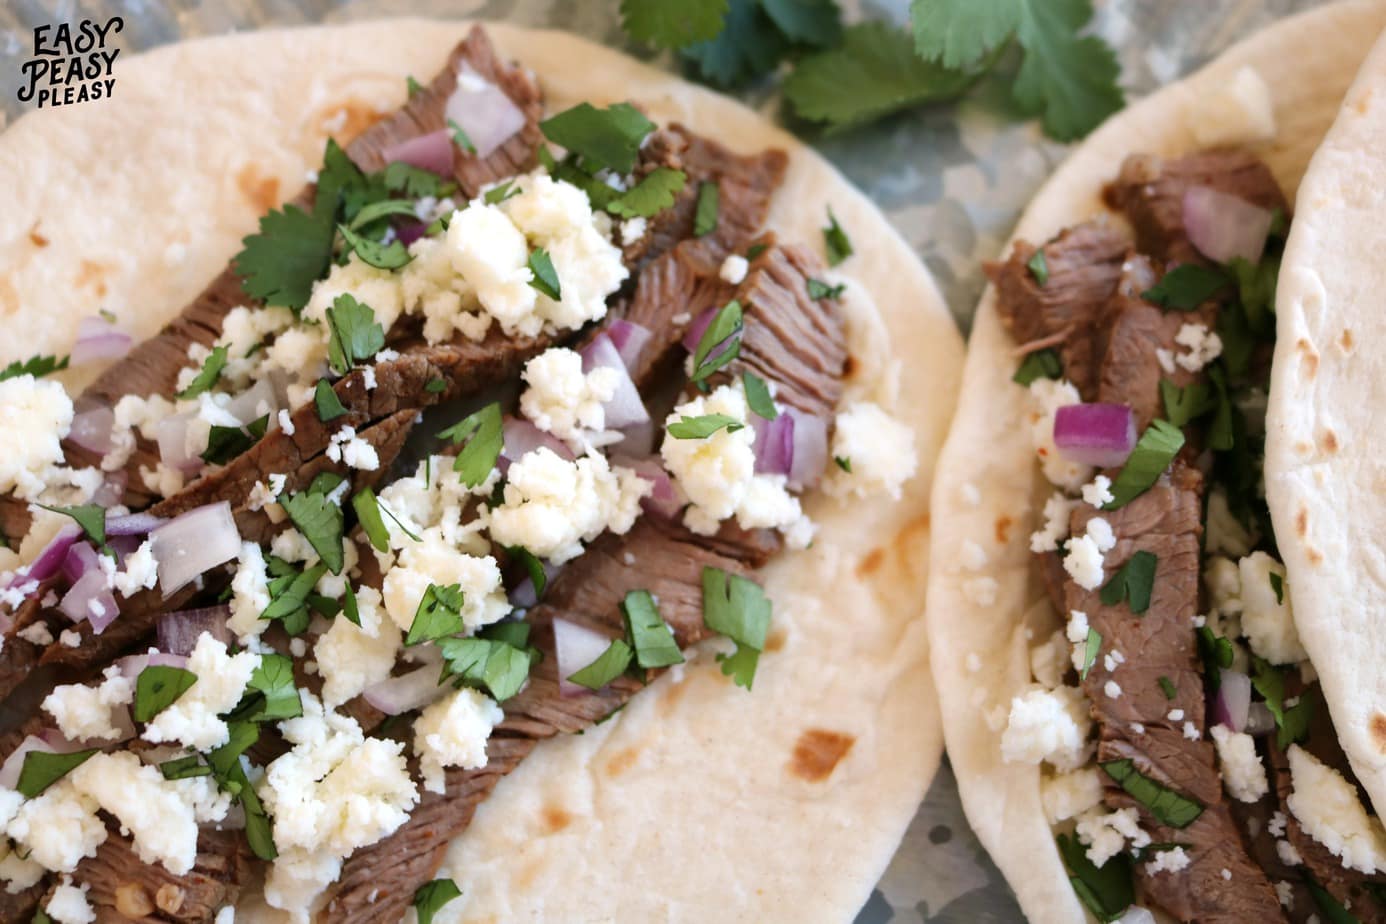 Liven up your Cinco De Mayo, Taco Tuesday, or any day of the week with these easy Steak Tacos.